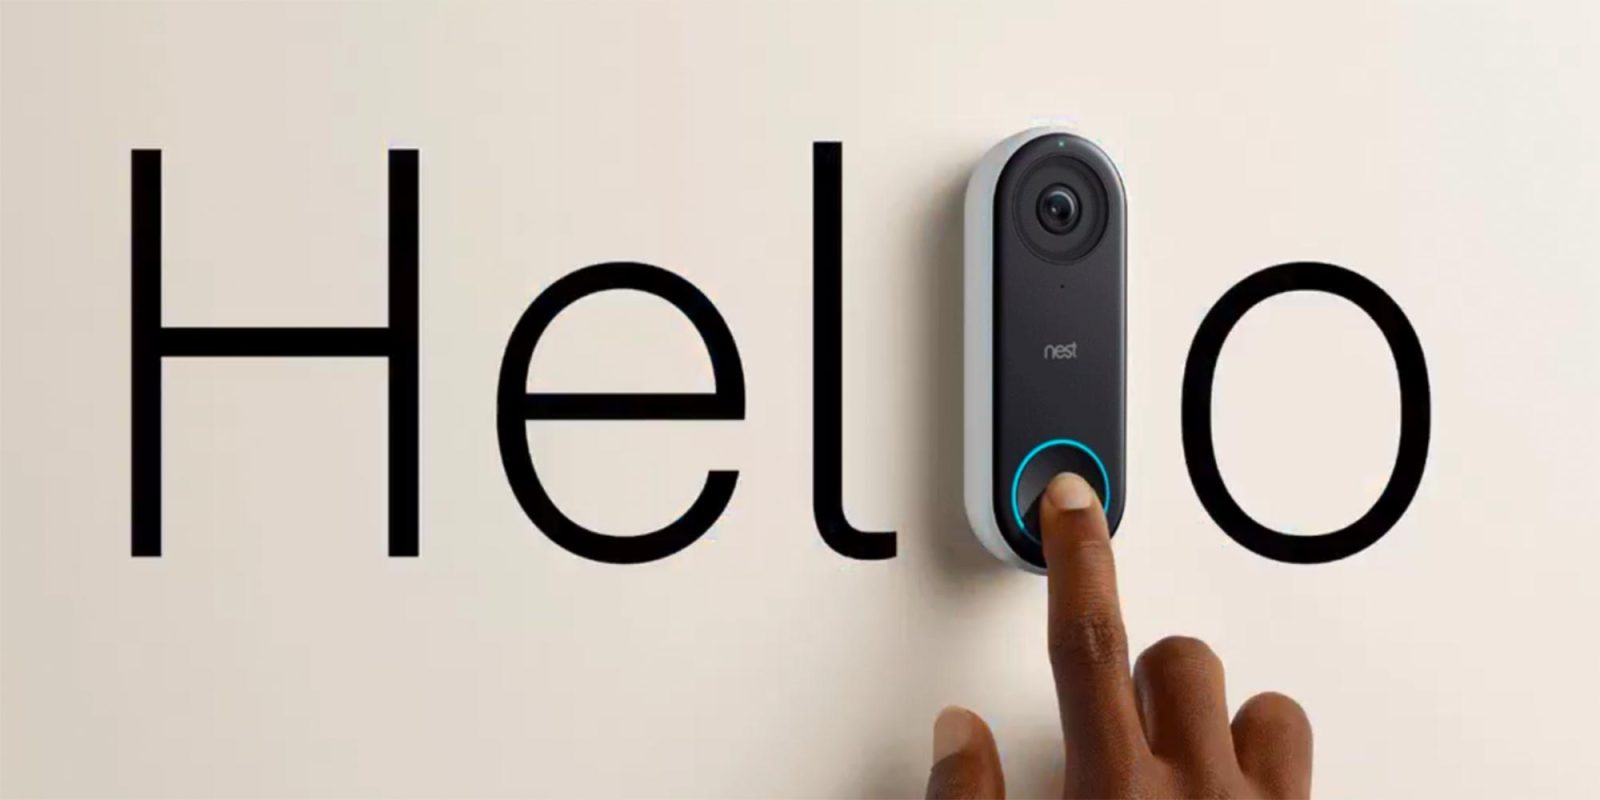 Installation And Review Of The Nest Hello Video Doorbell Sam Kear